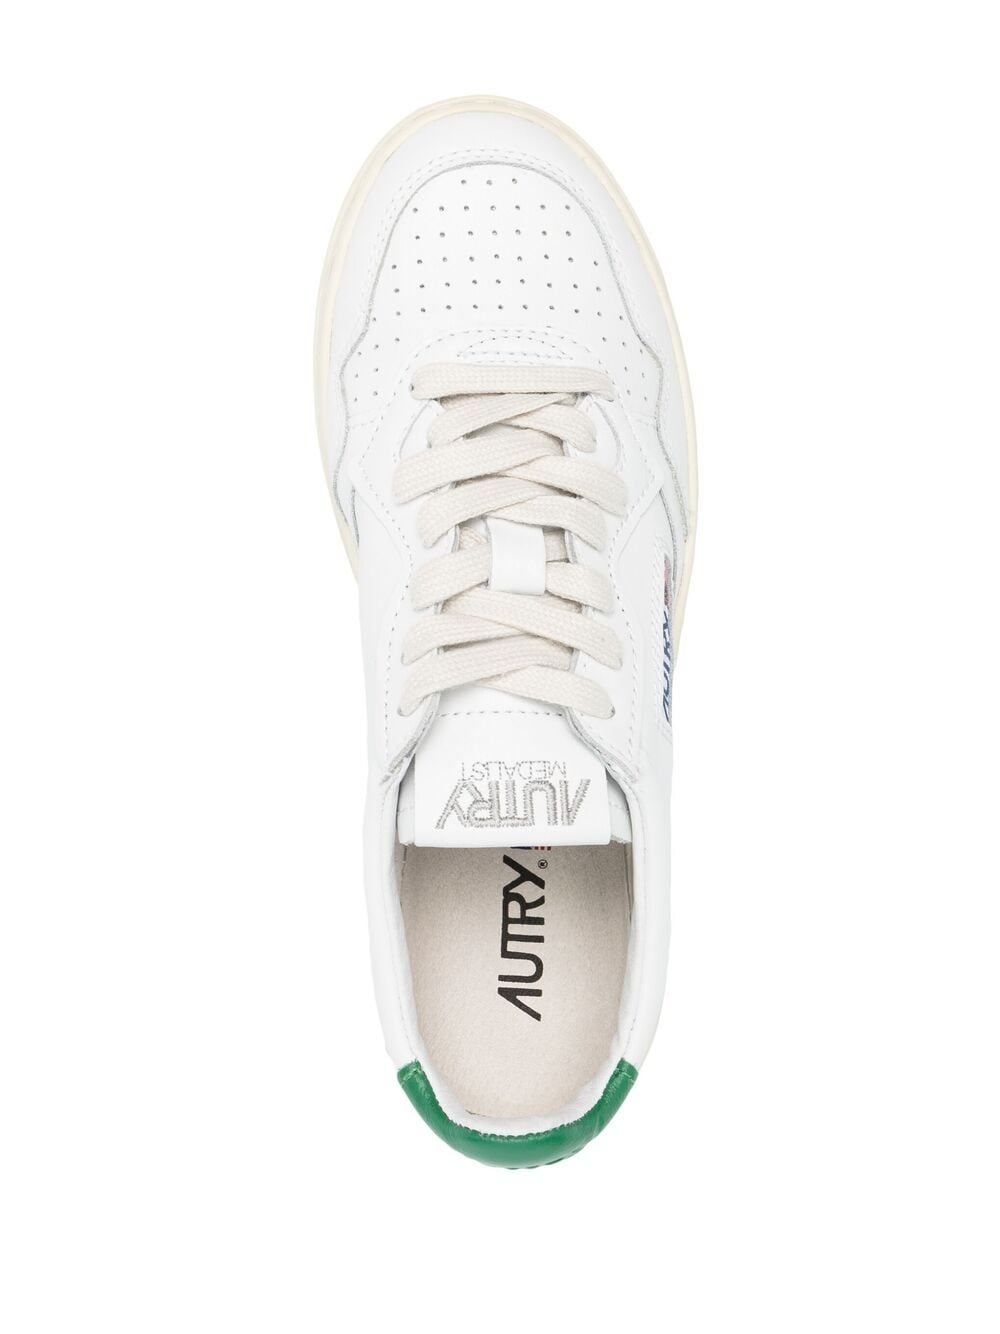 Autry - Medalist leather sneakers - Green